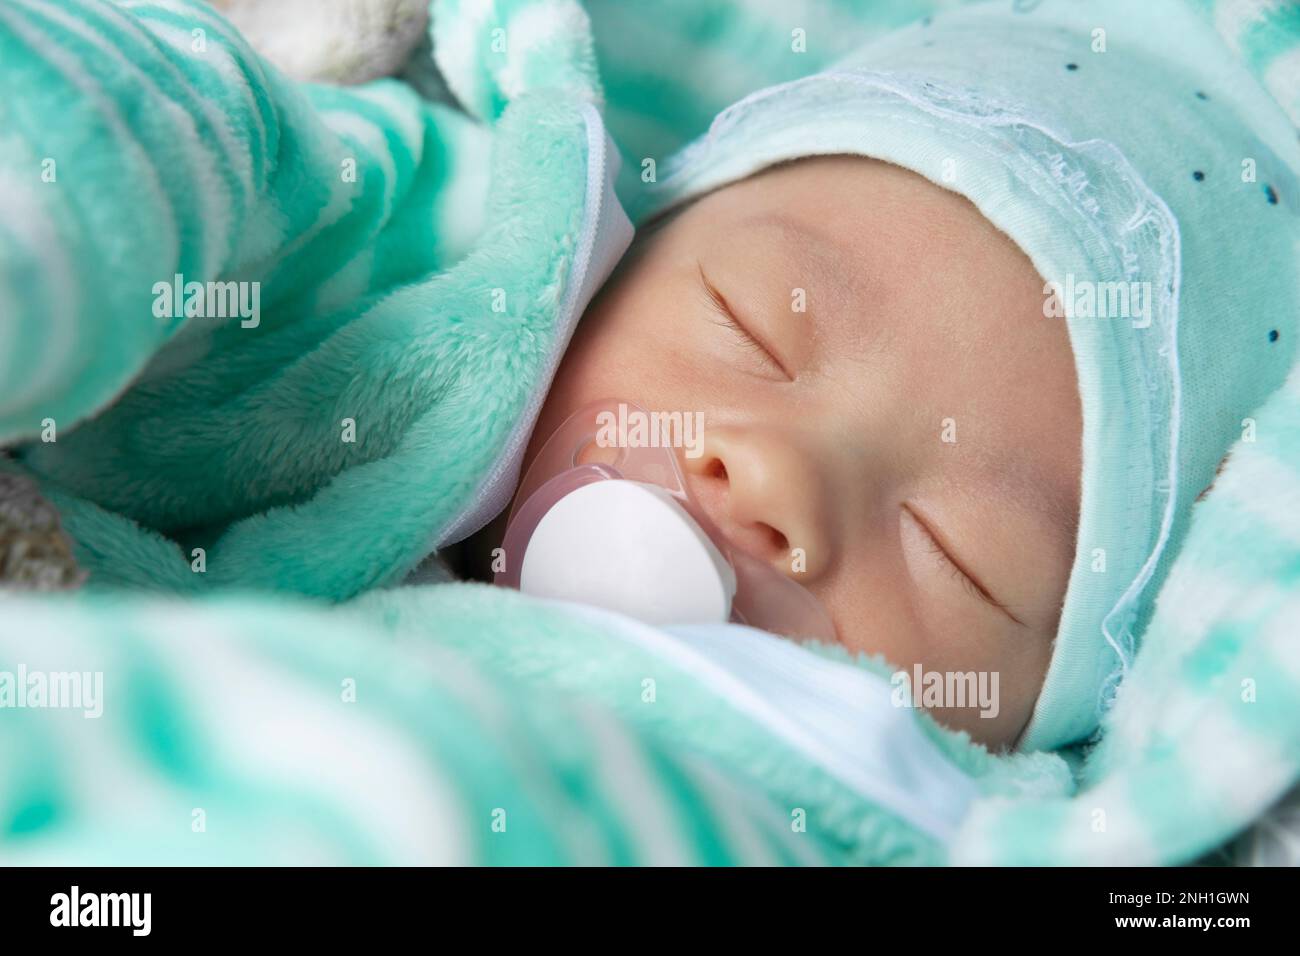 two months old baby boy sleeping portrait Stock Photo